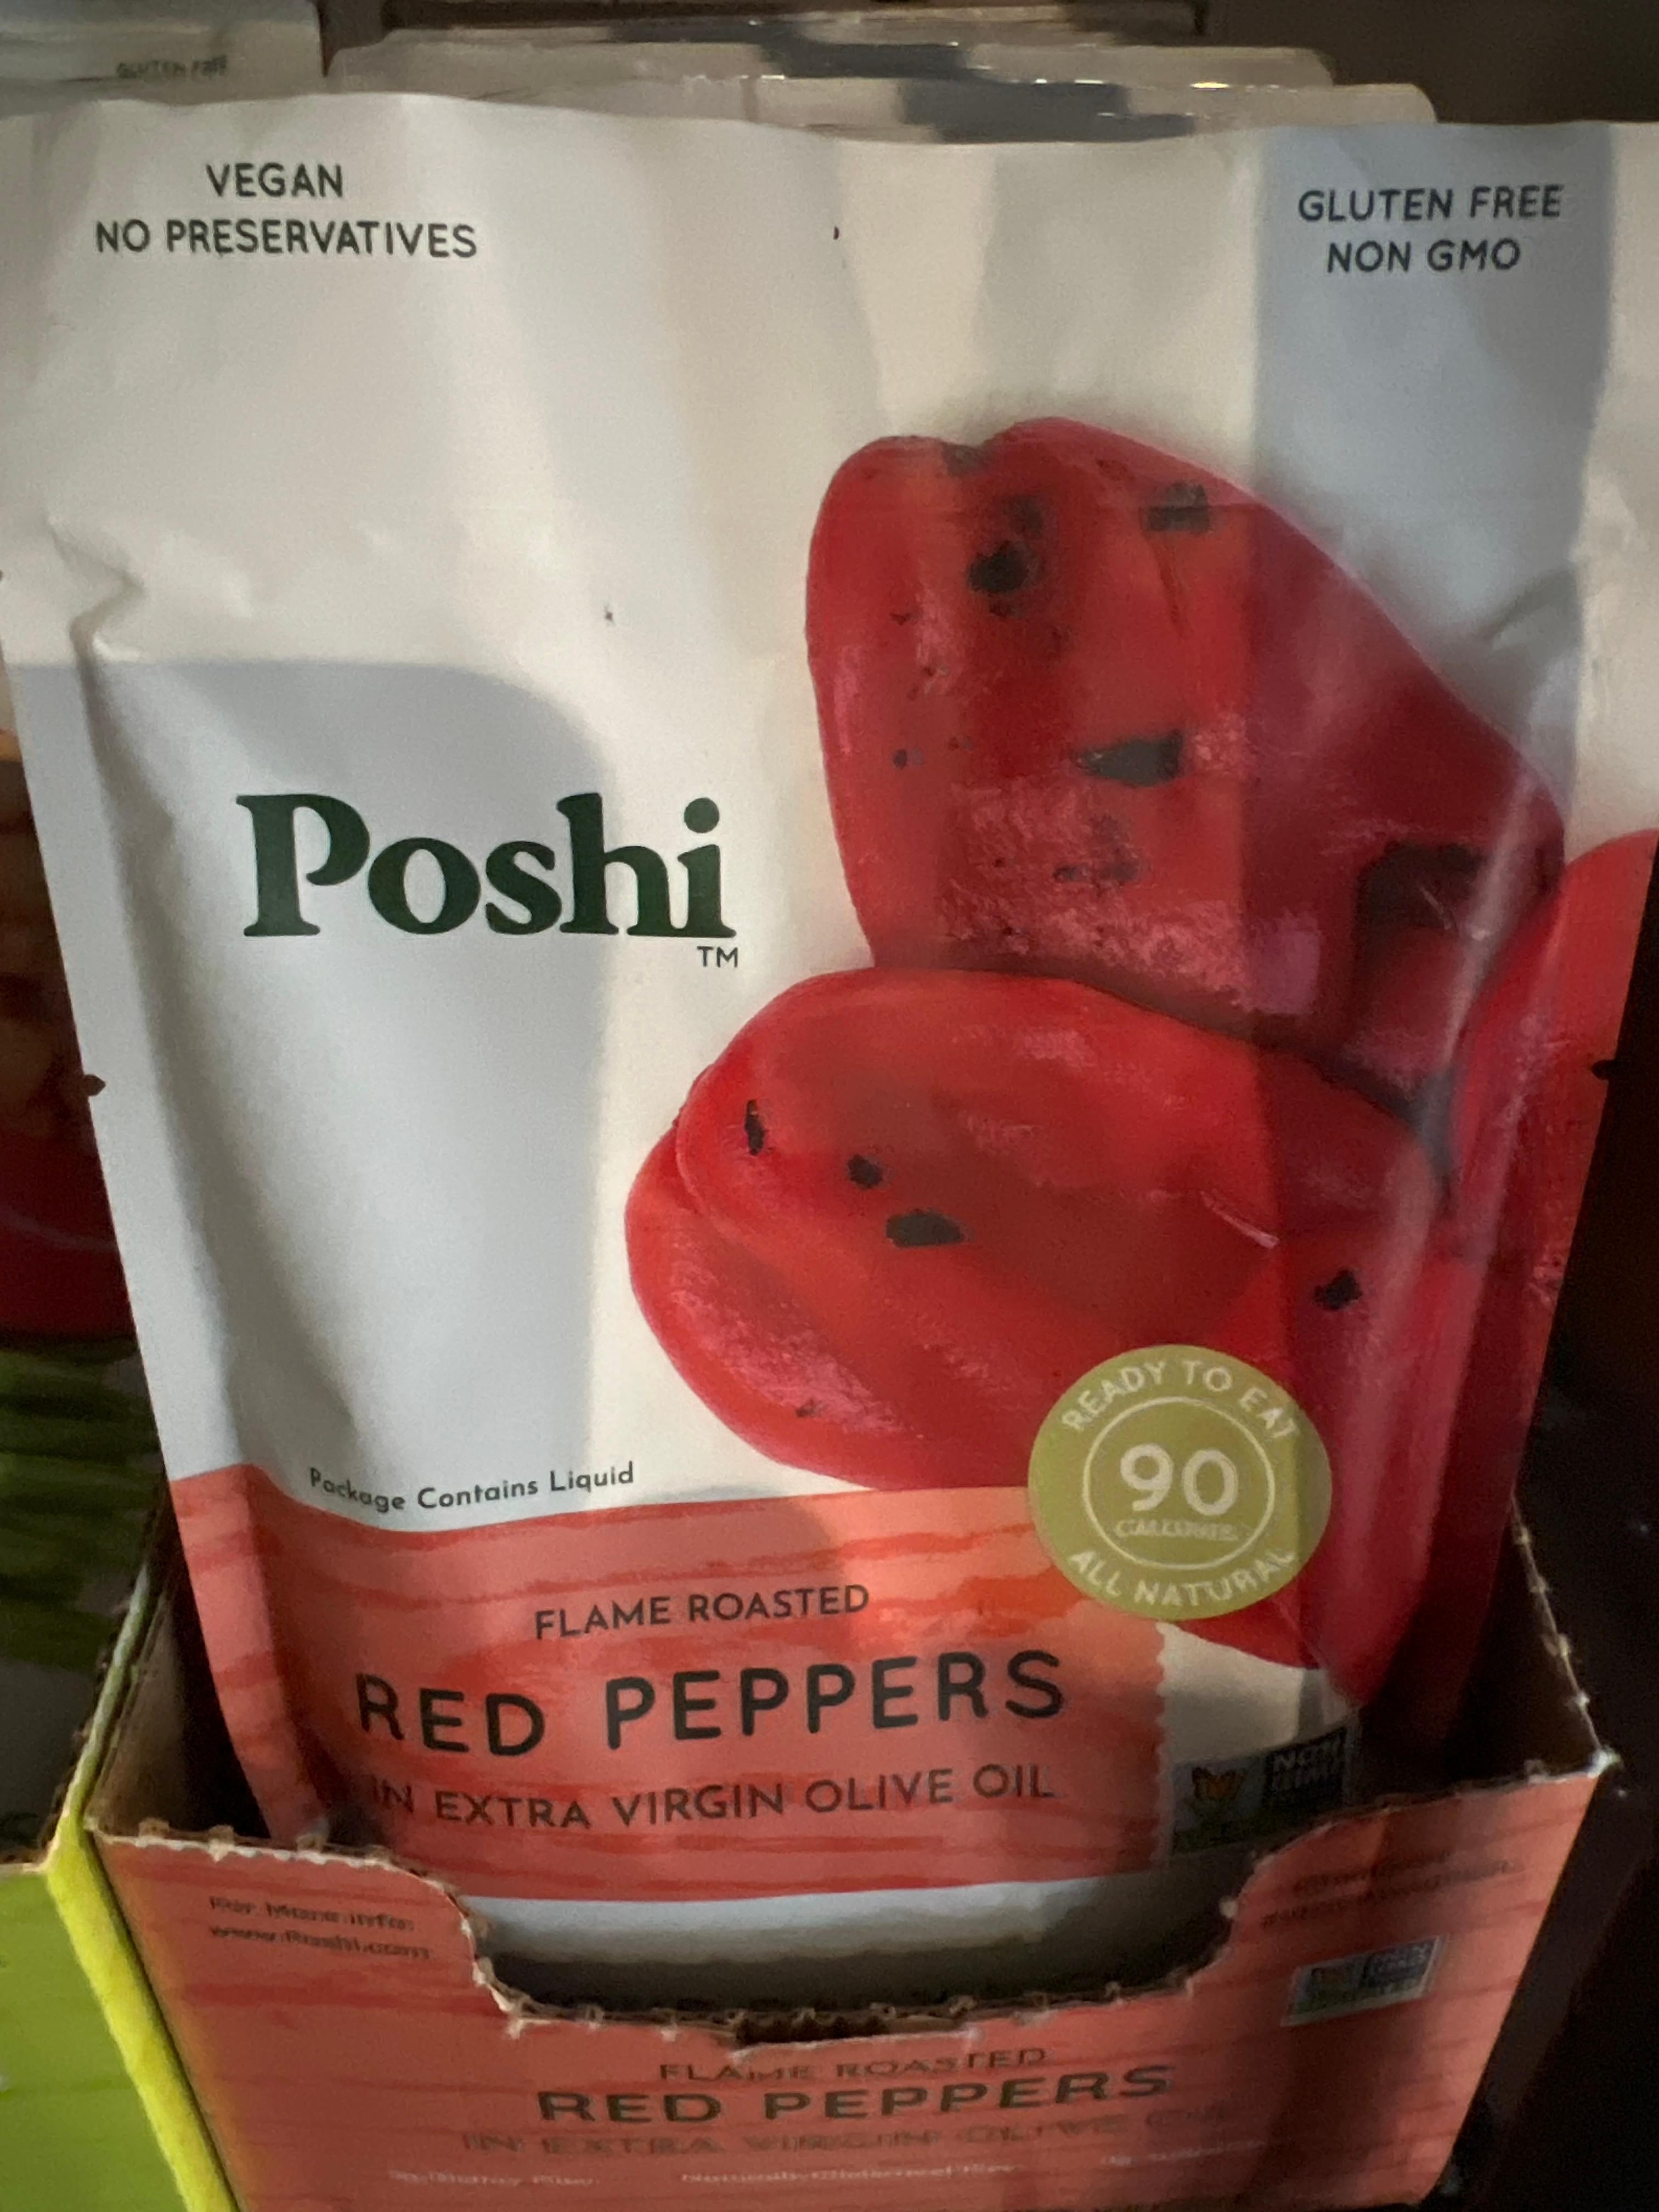 ROASTED RED PEPPERS -POSHI